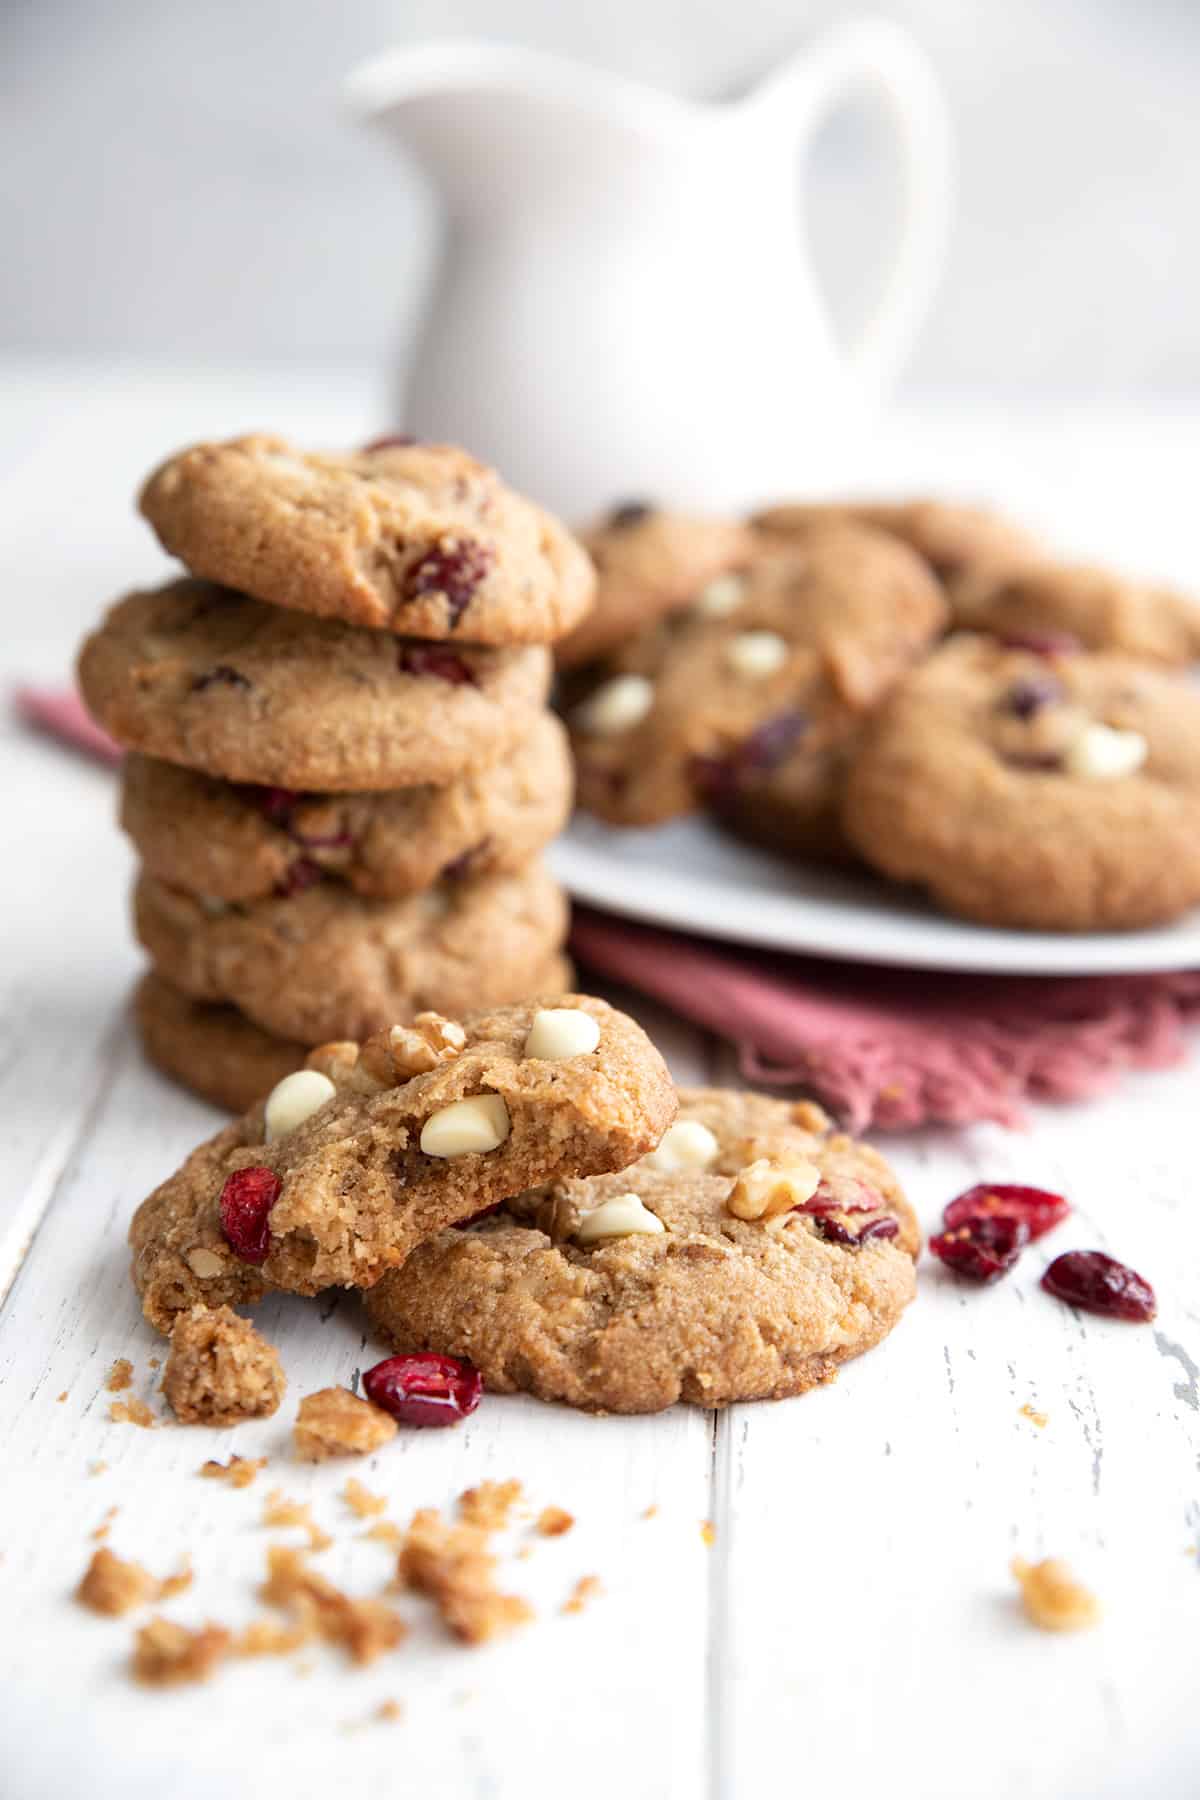 Two Keto White Chocolate Cranberry Cookies sit on a white table with a plate of more cookies in the background.